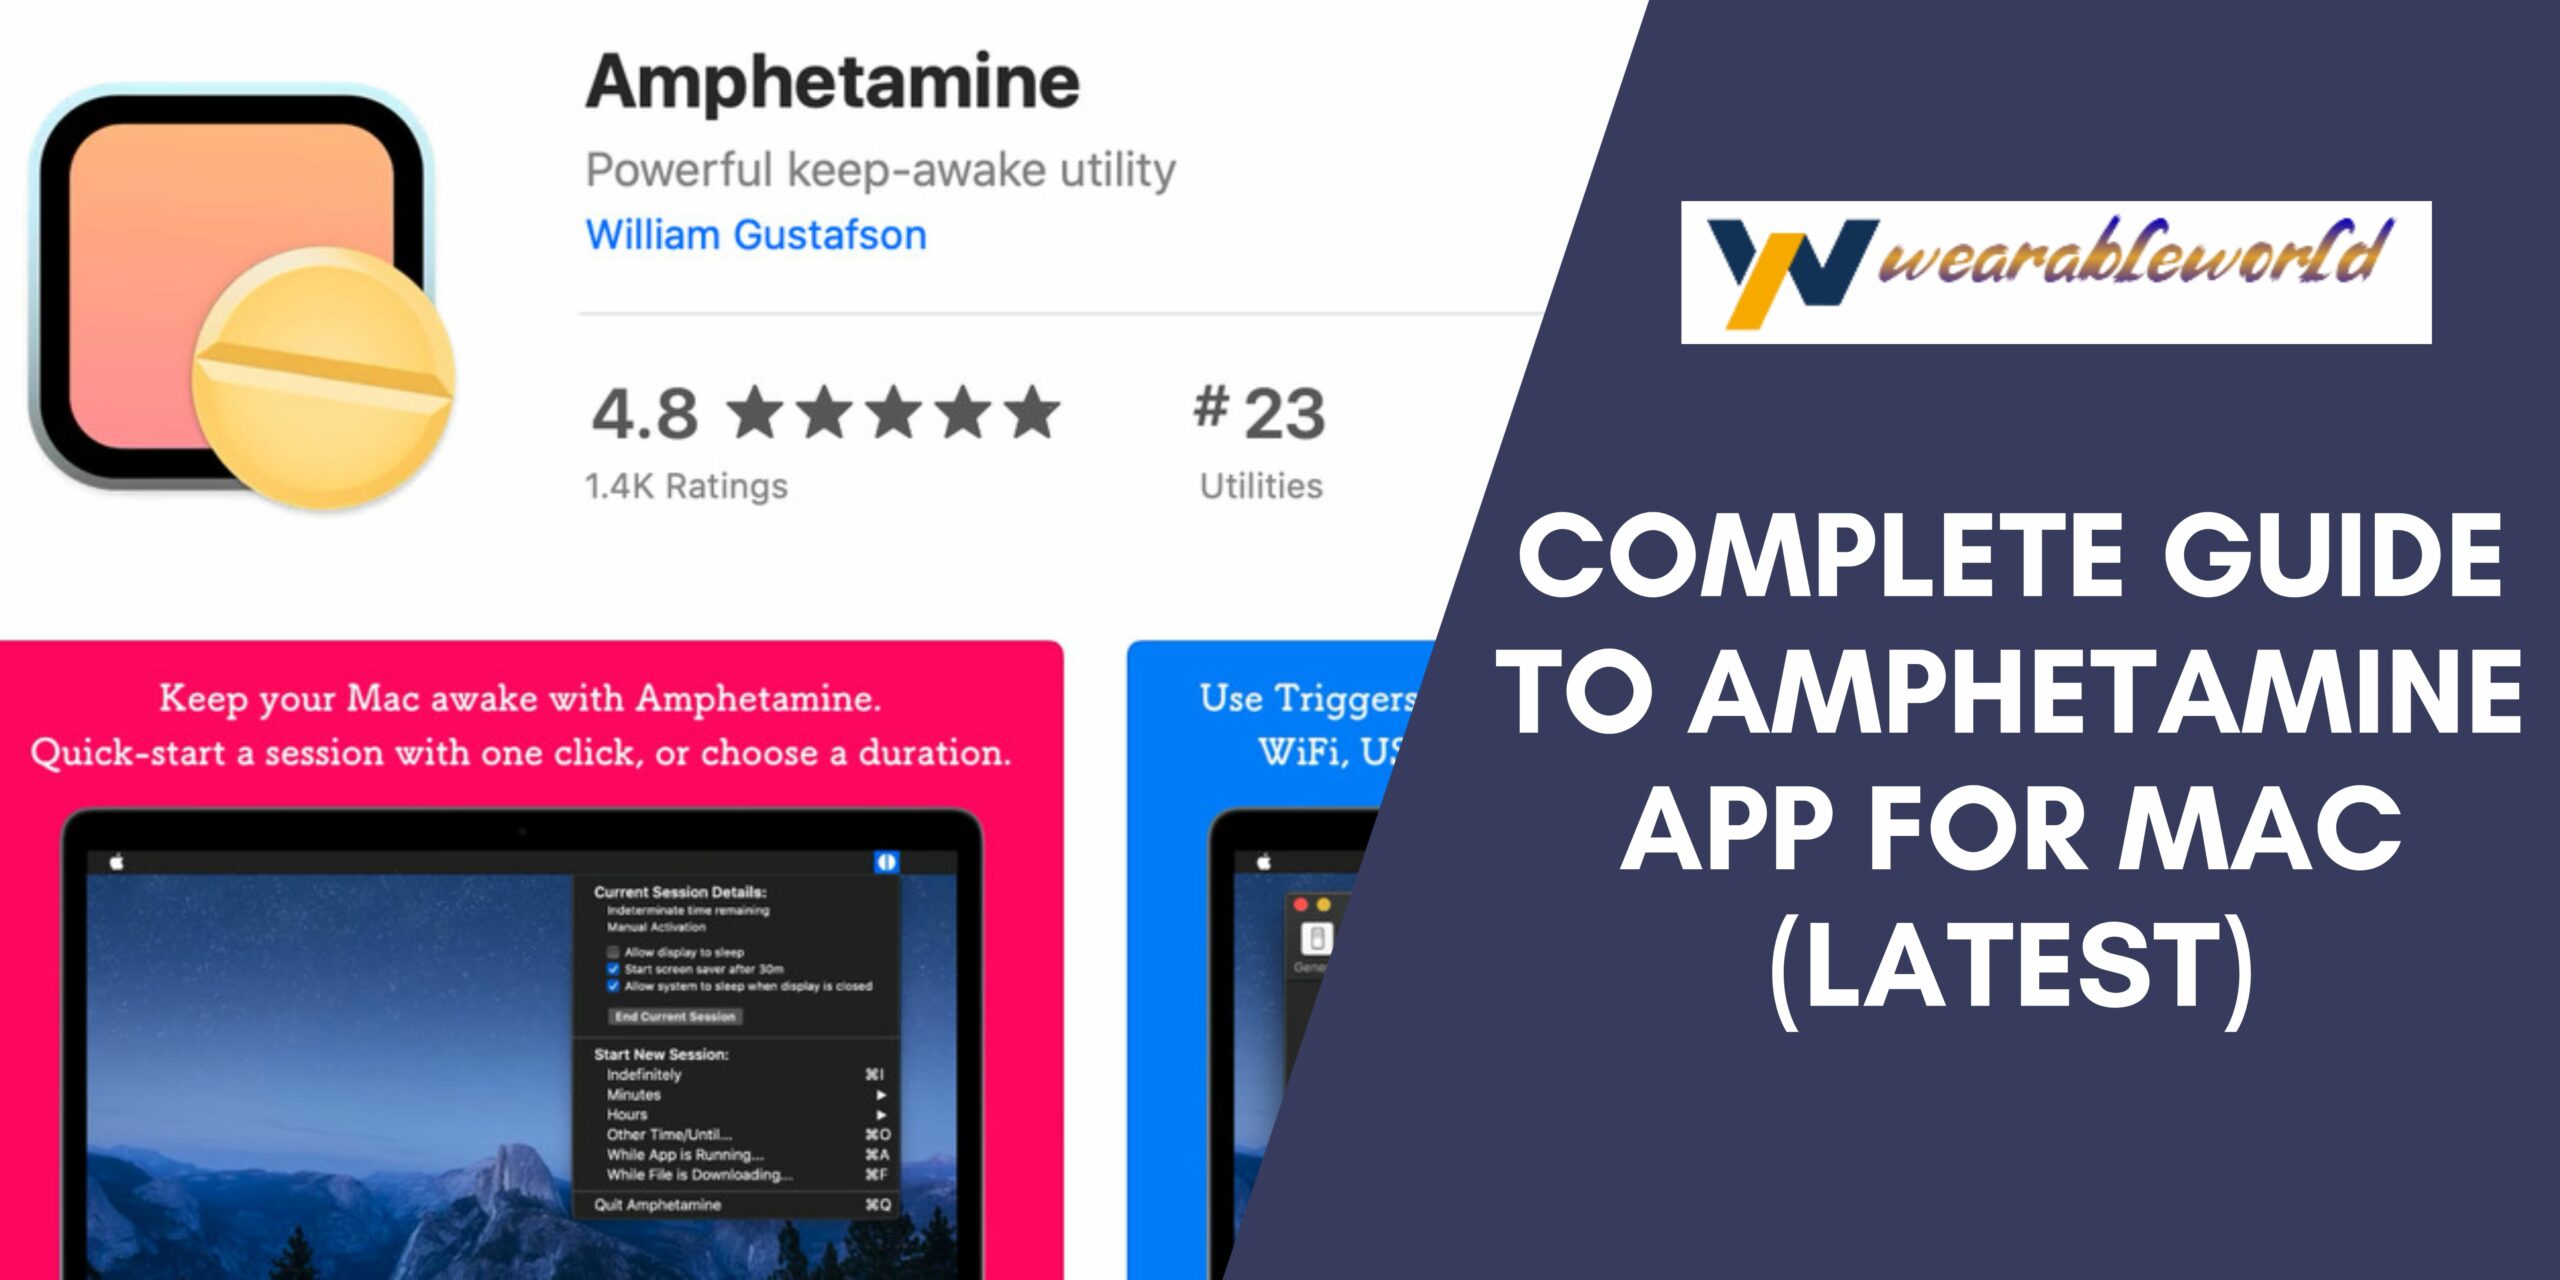 Complete Guide To Amphetamine App For Mac (Latest)